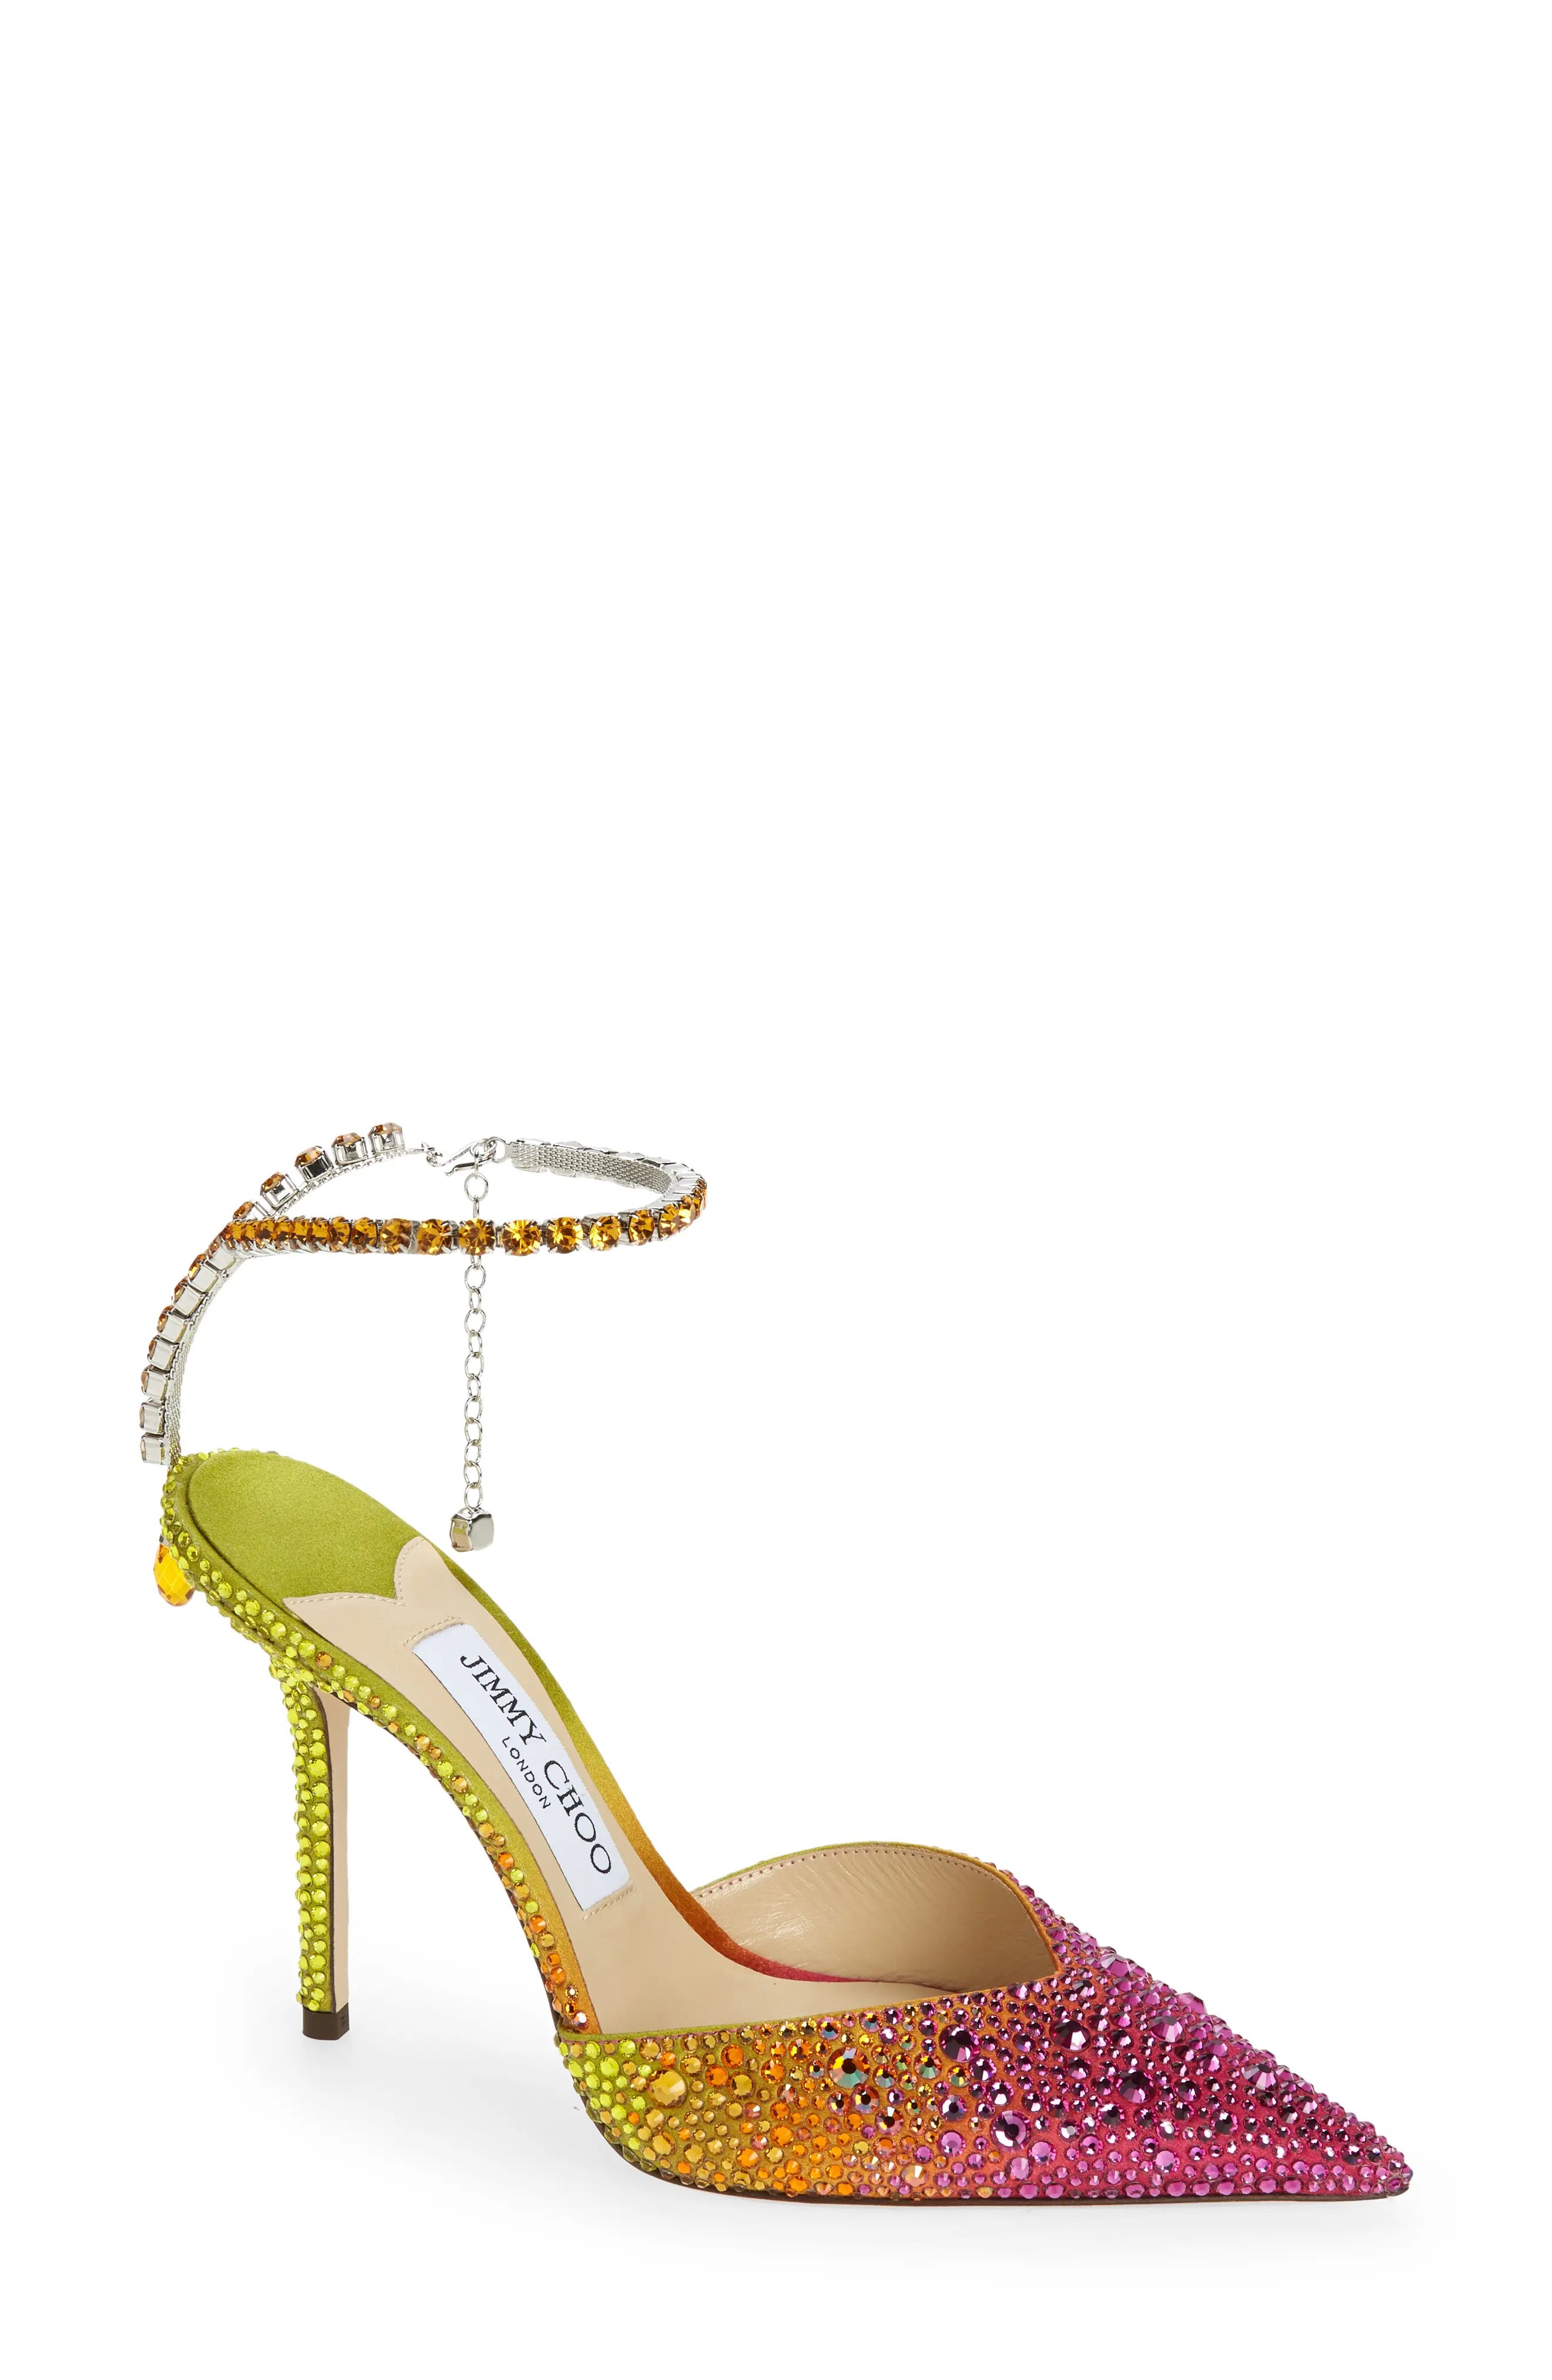 Jimmy Choo Saeda Crystal Ankle Strap Pointed Toe Pump in Amber Orange/Berry Red/Lime at Nordstrom, S | Nordstrom